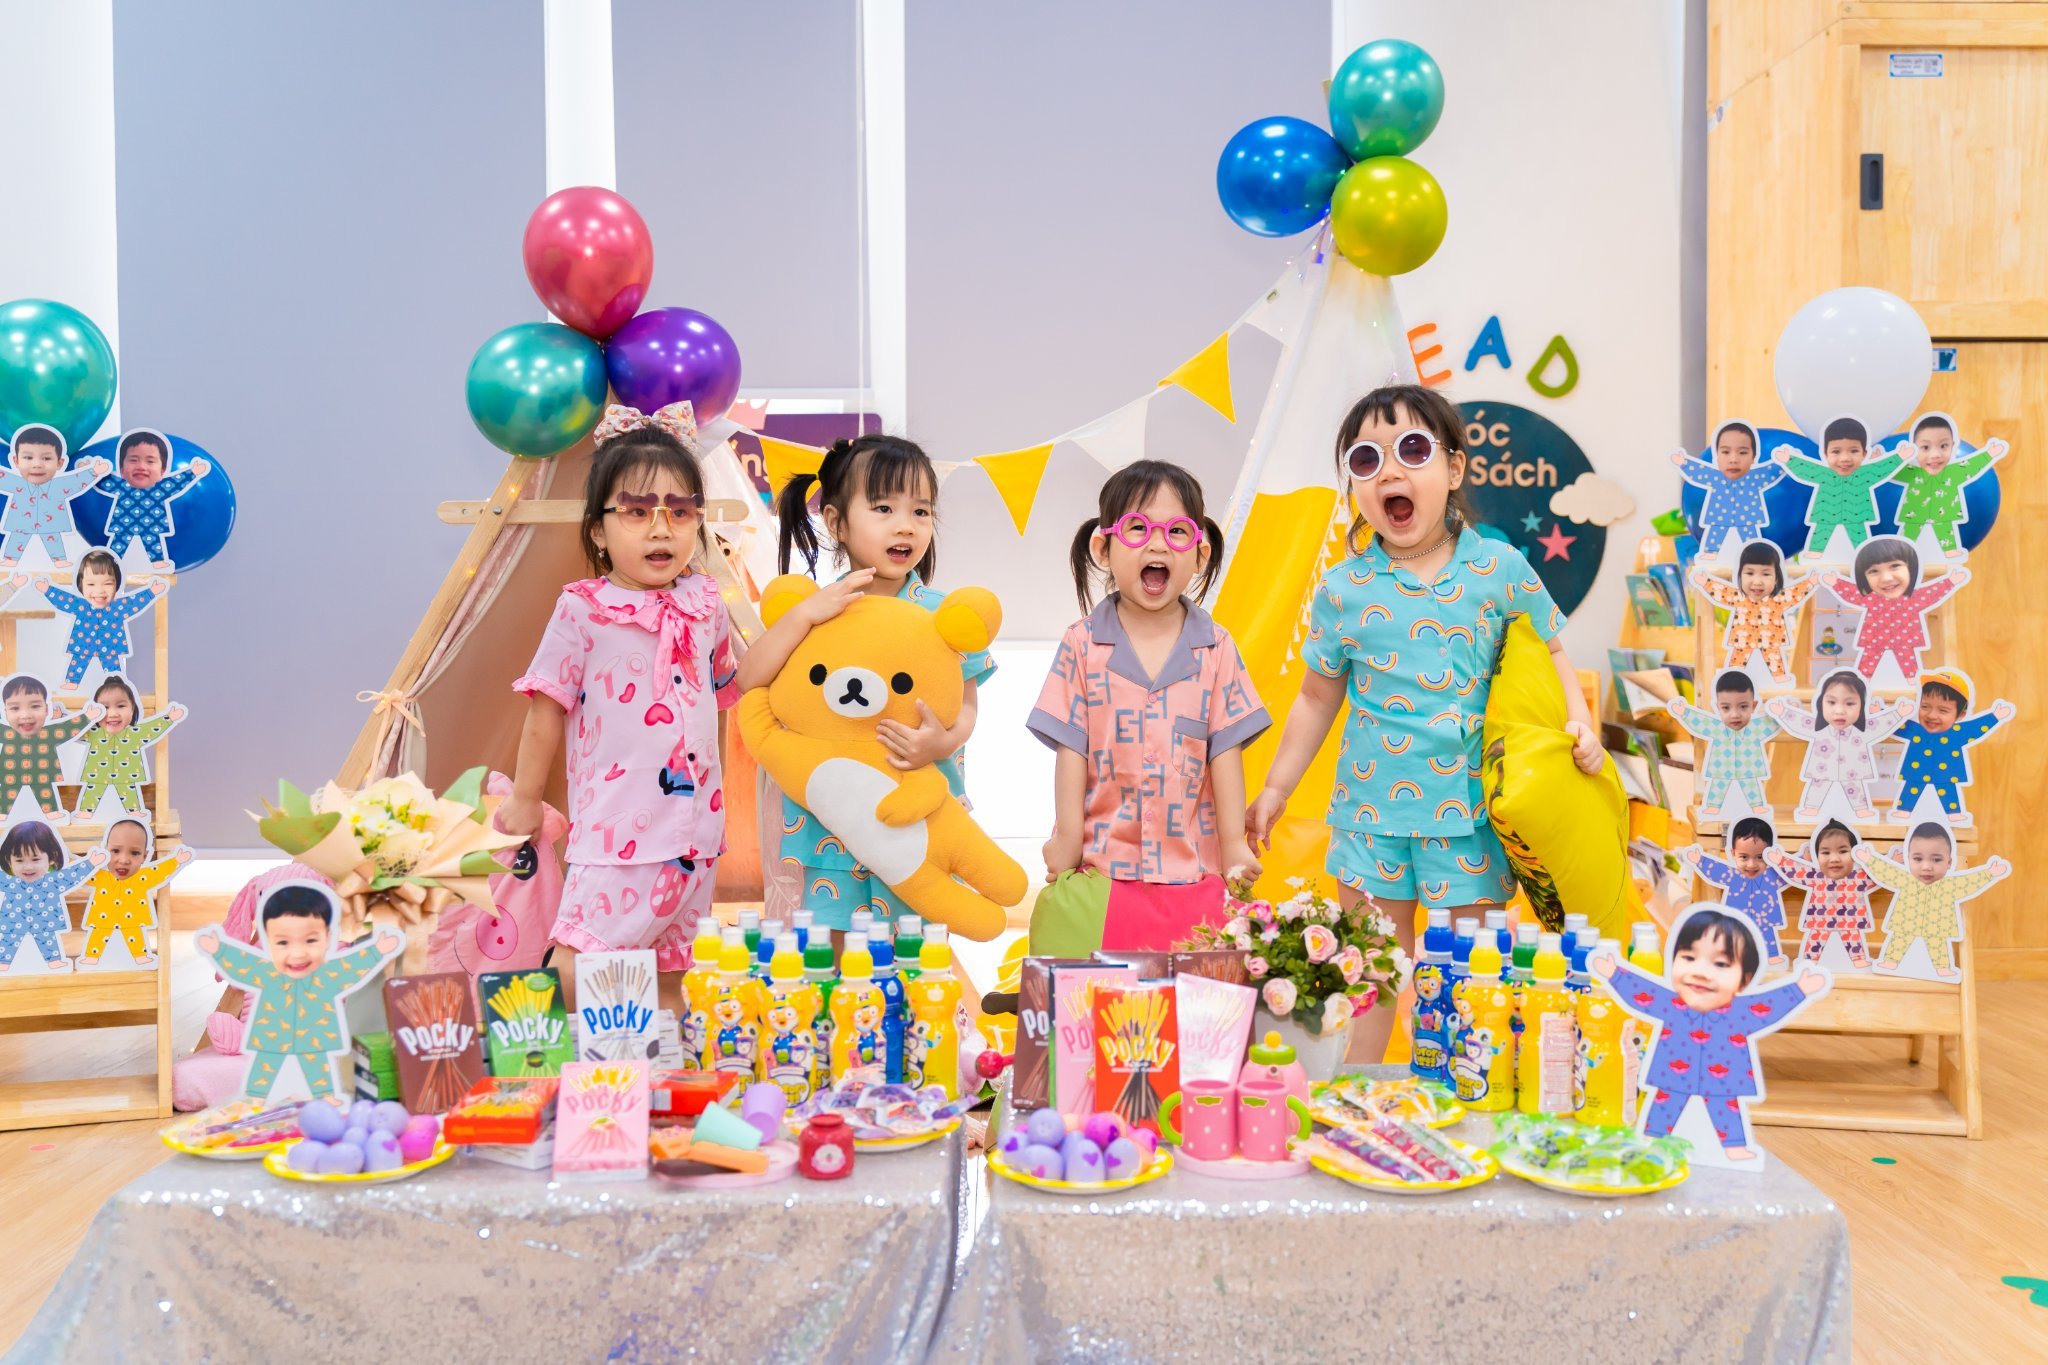 Colouring summer with a Pyjama Party